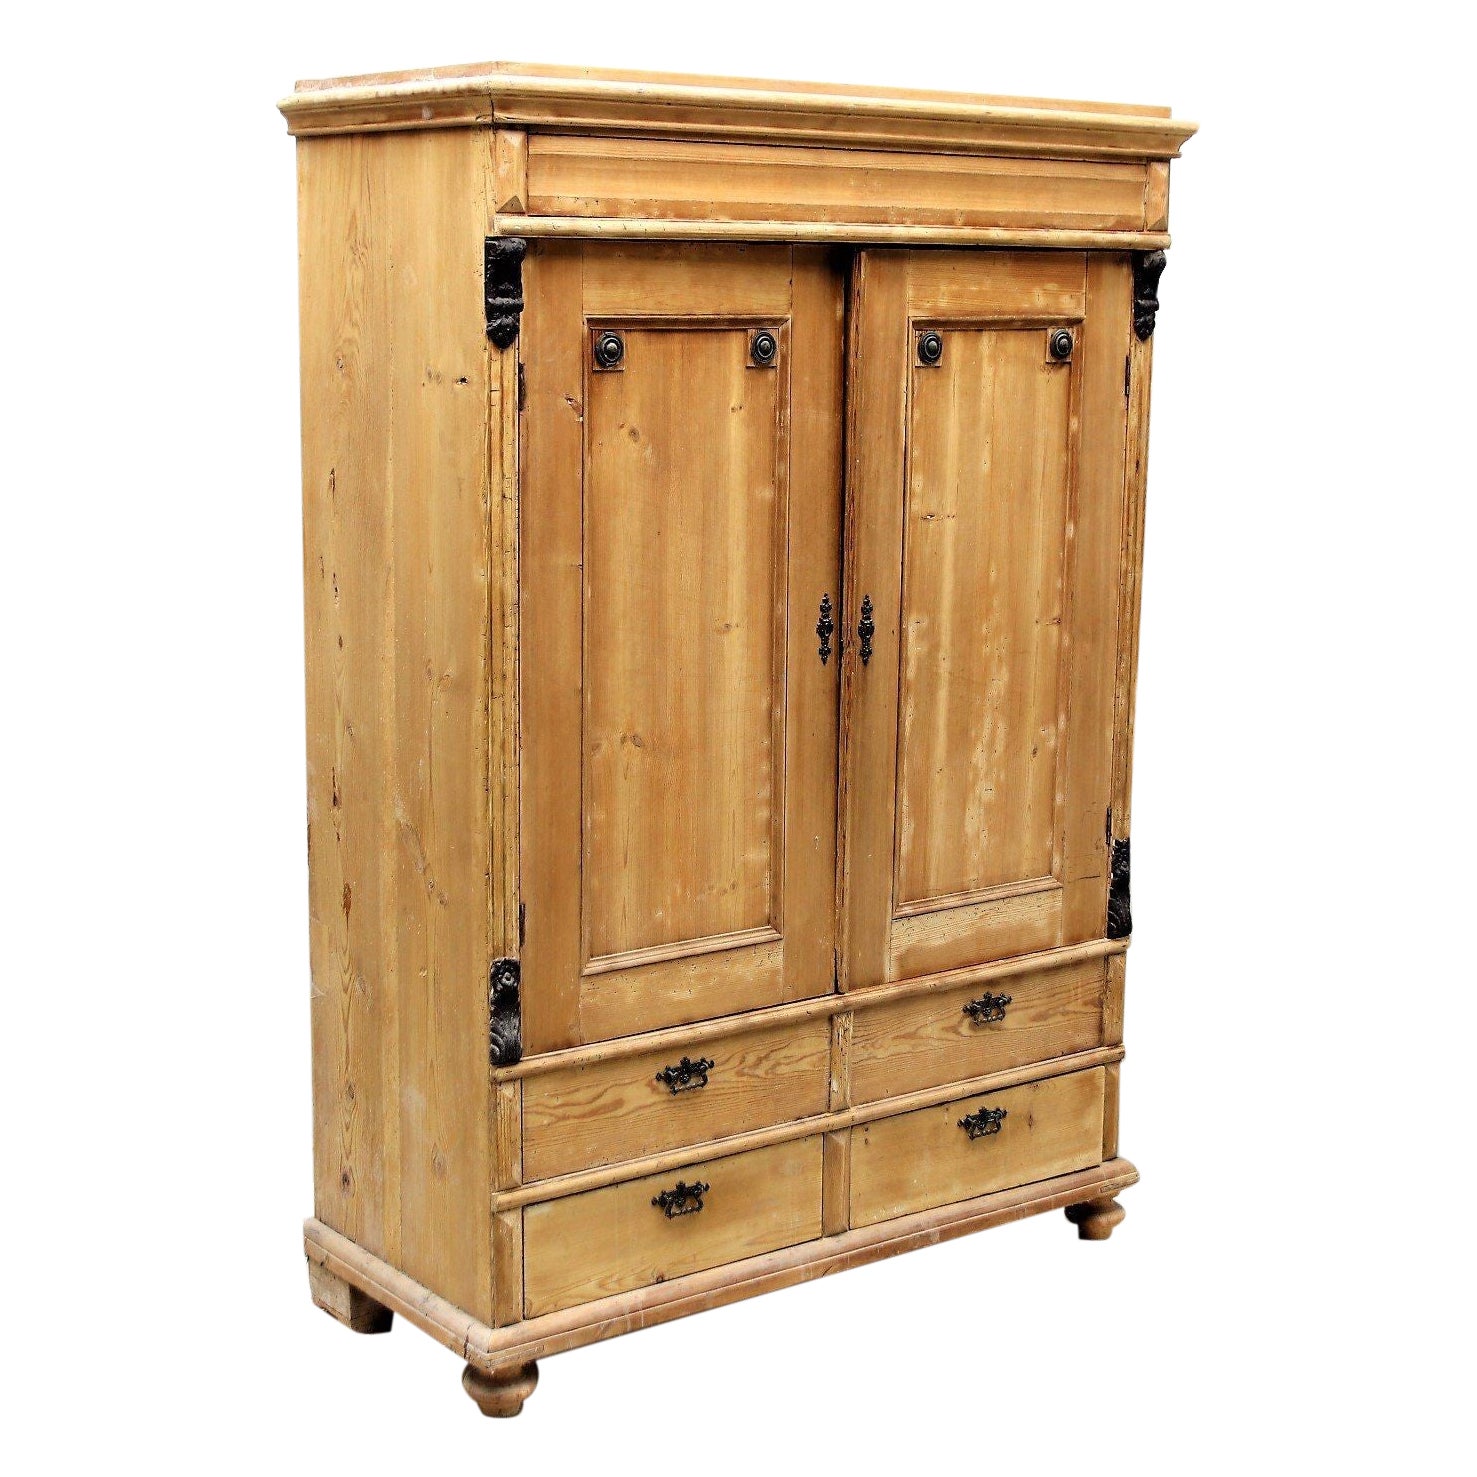 Early 1800s Large Swedish Pine Armoire with Original Hardware For Sale